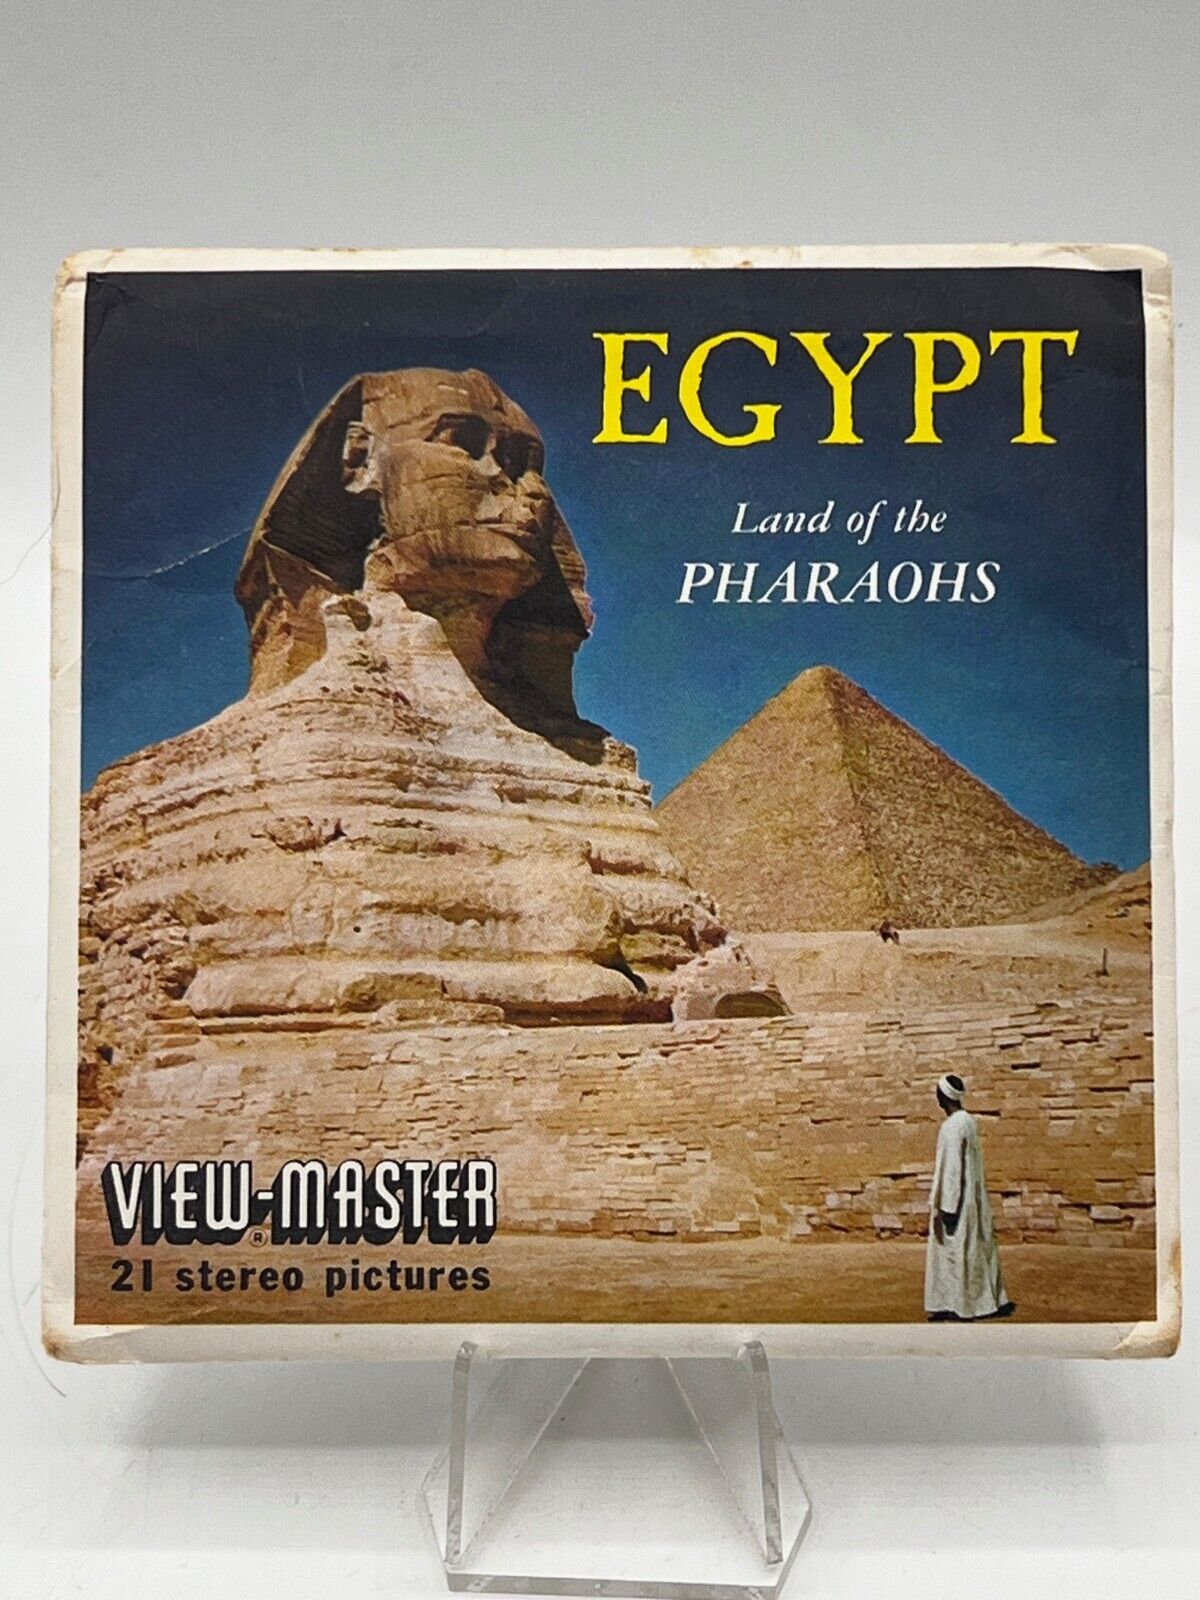 Vintage View-Master Sawyer's Inc. 1950 Egypt Land of the Pharaohs, 3-Reel packet